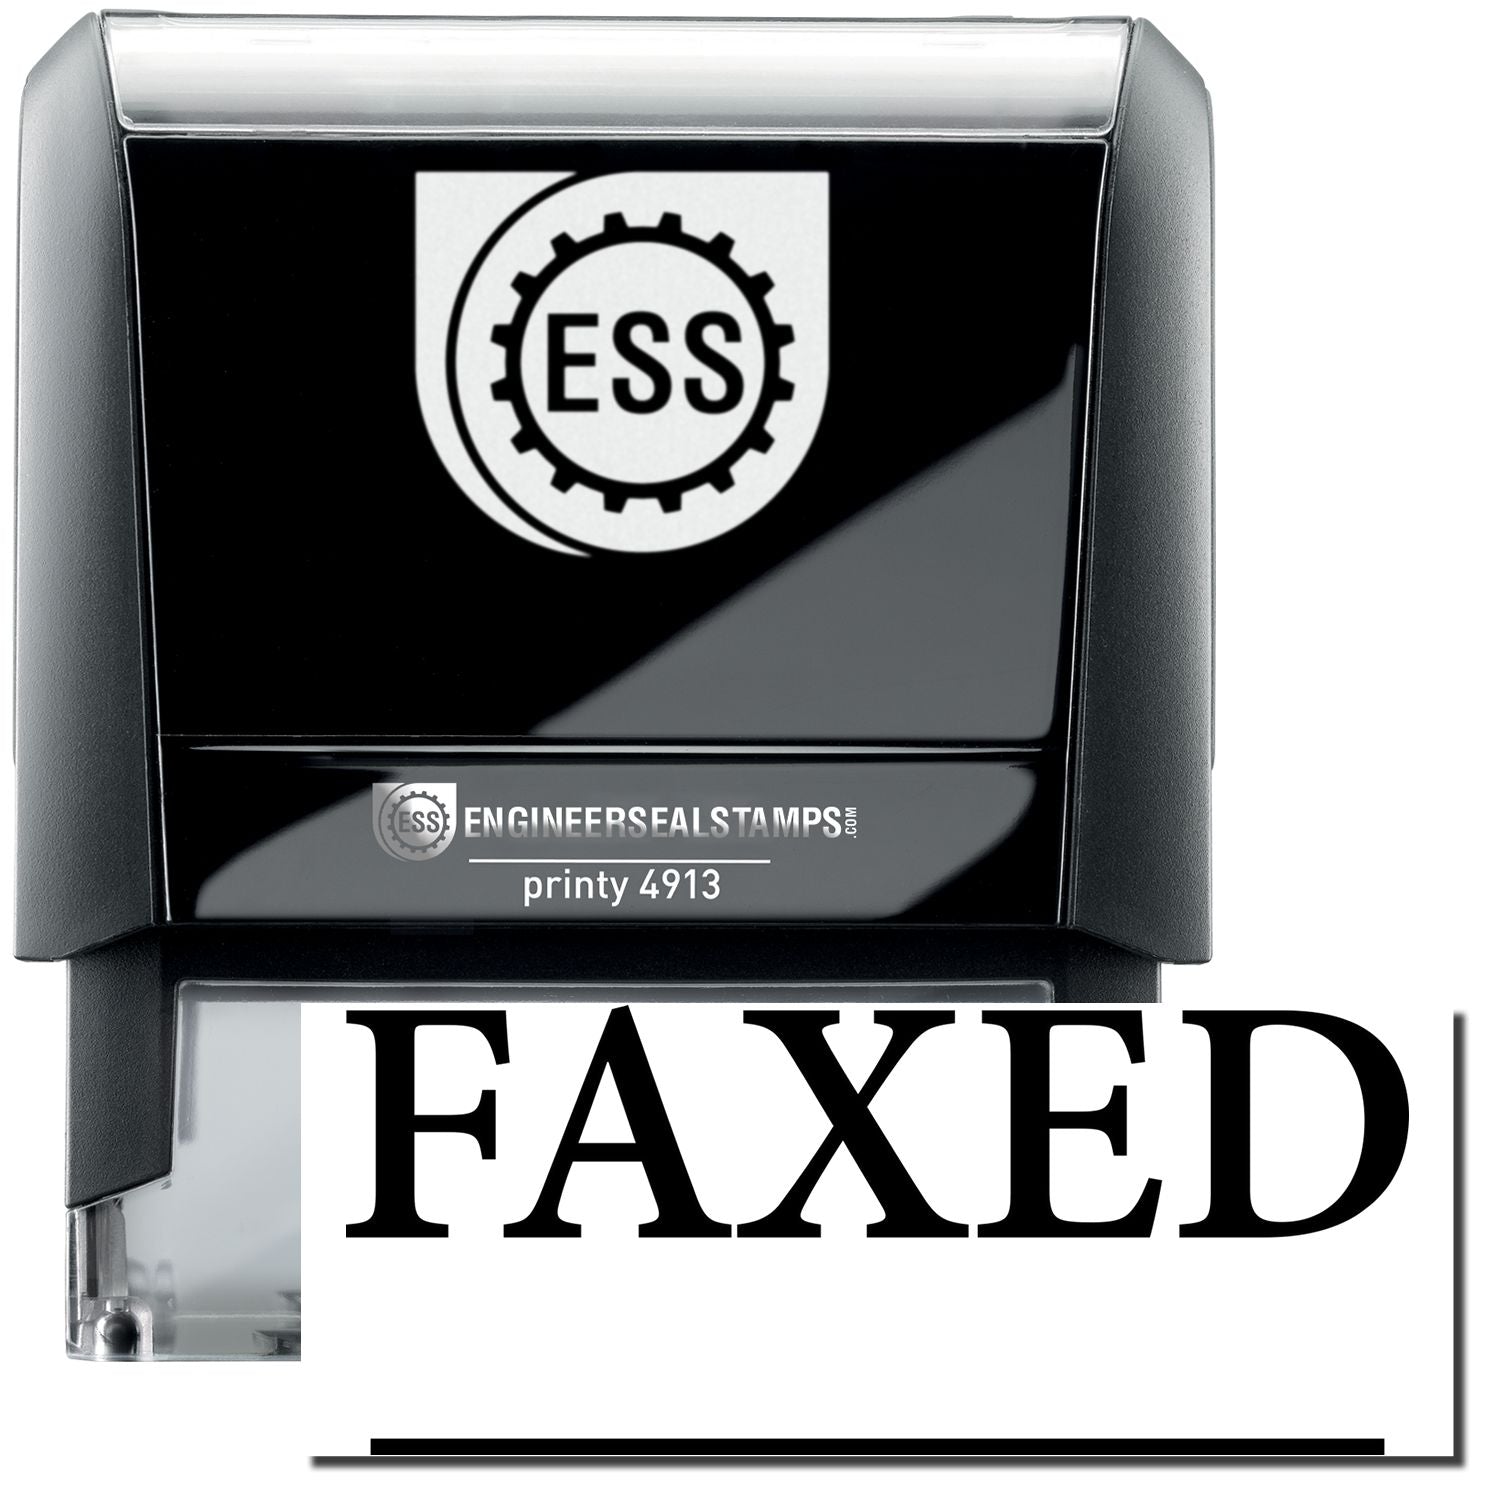 A self-inking stamp with a stamped image showing how the text "FAXED" in a large font with a line is displayed by it after stamping.